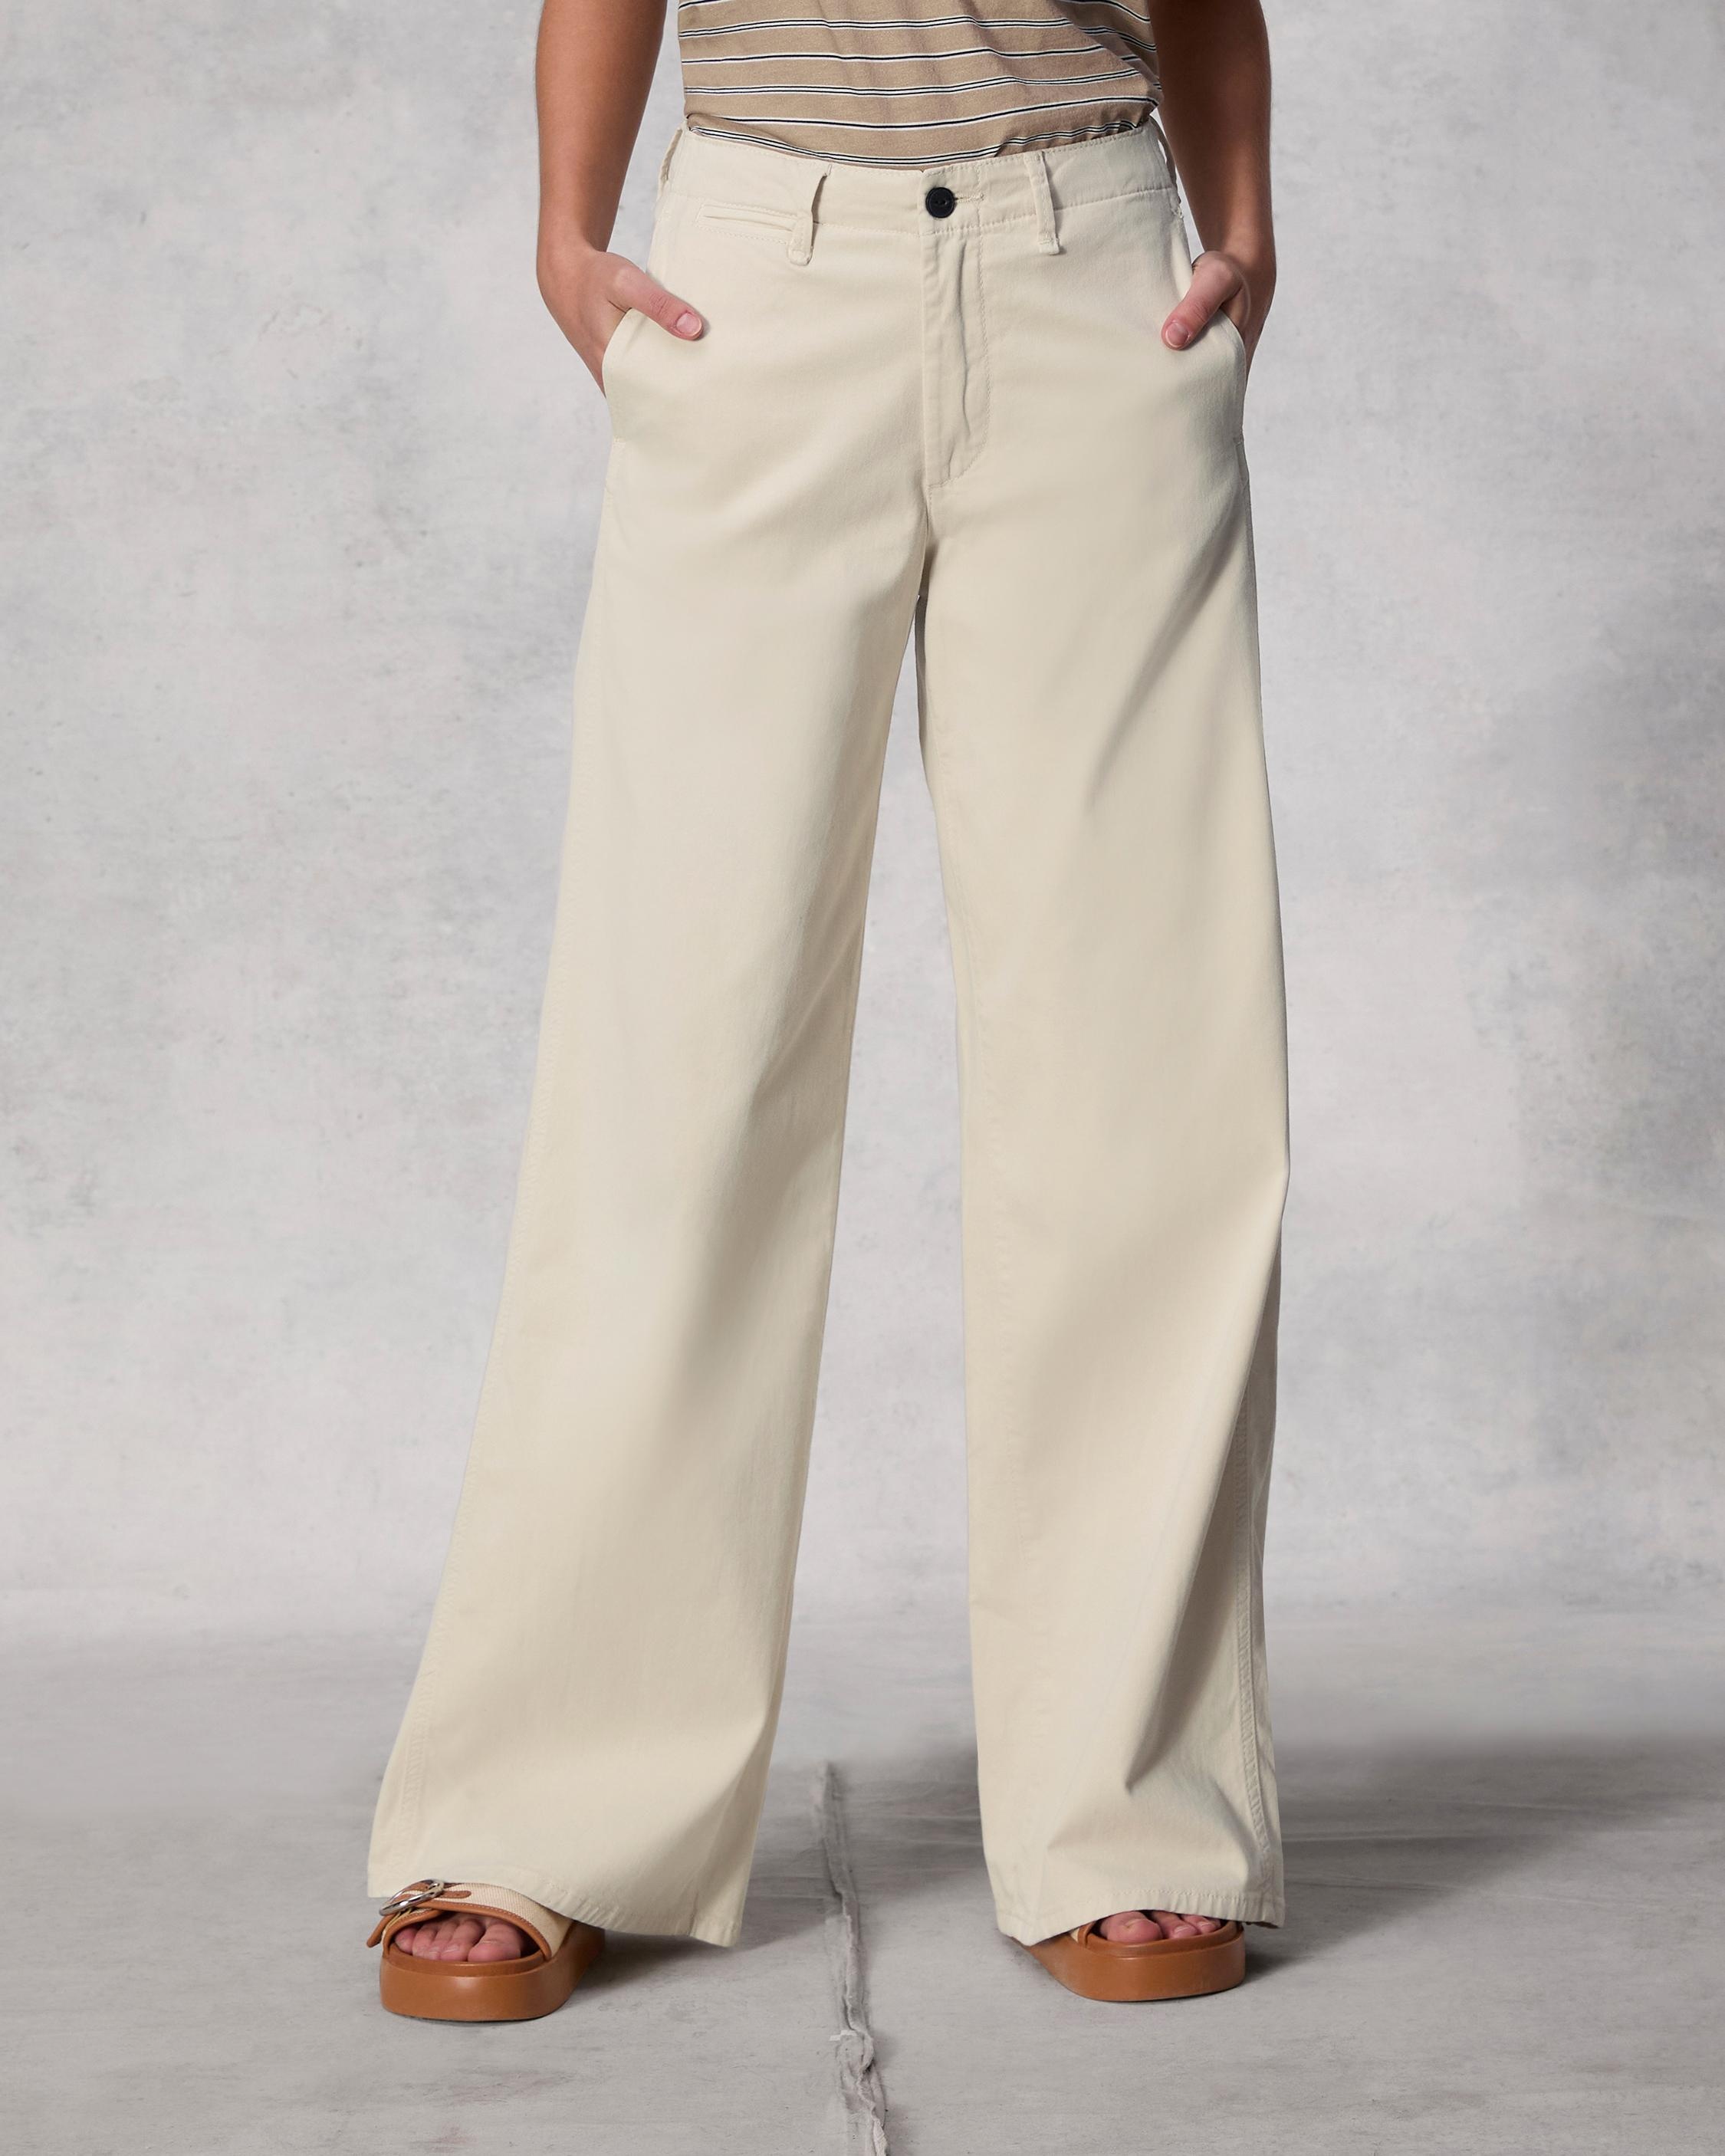 Sofie Wide-Leg Cotton Chino
Relaxed Fit - 5